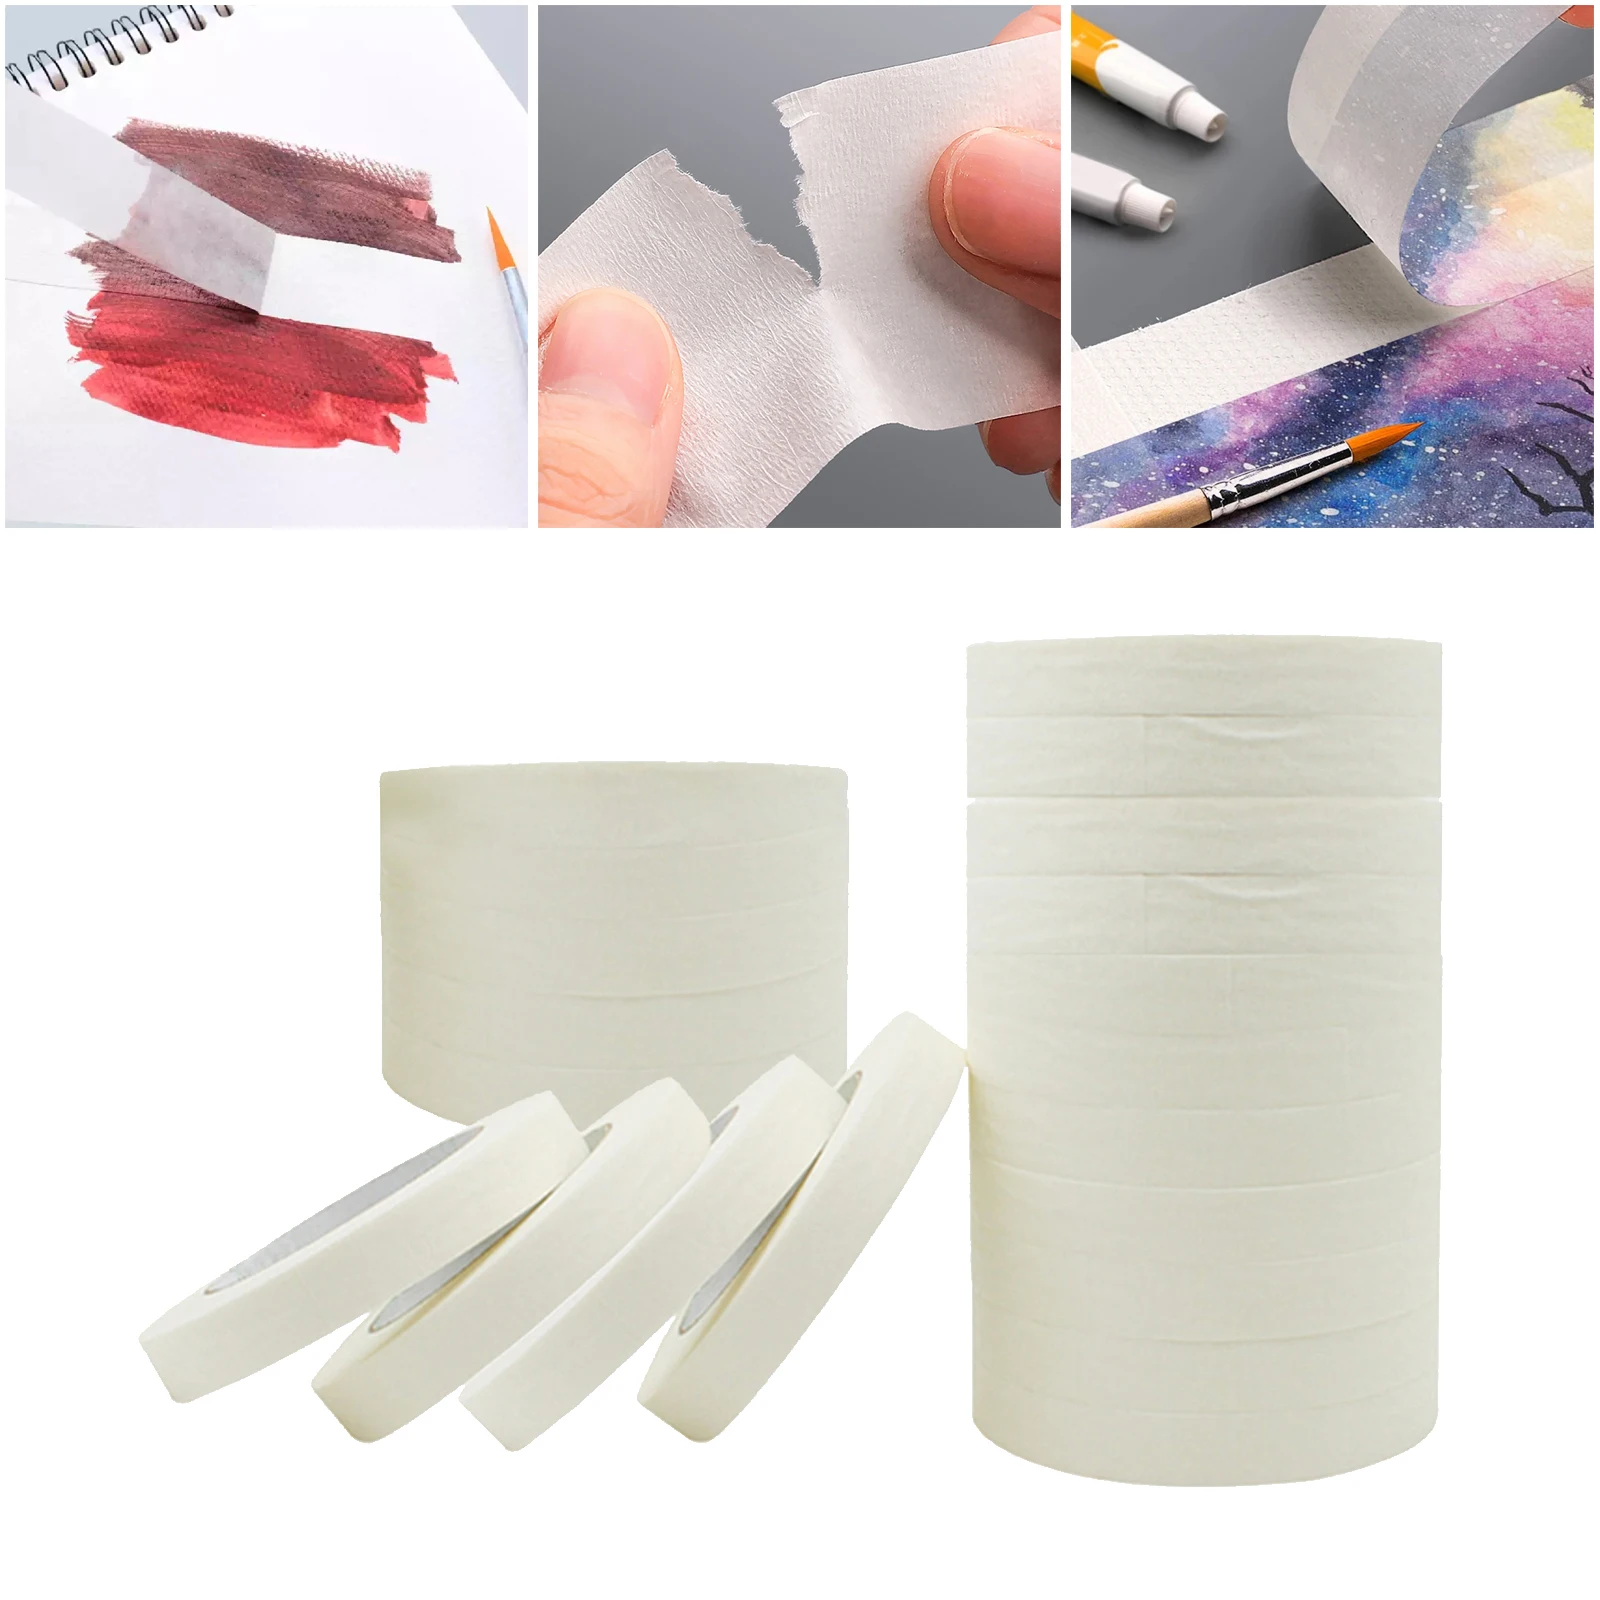 20Pack Masking Tape White Color 10/15/20mm Single Side Tape Adhesive Crepe Paper for Oil Painting Sketch Drawing Supplies